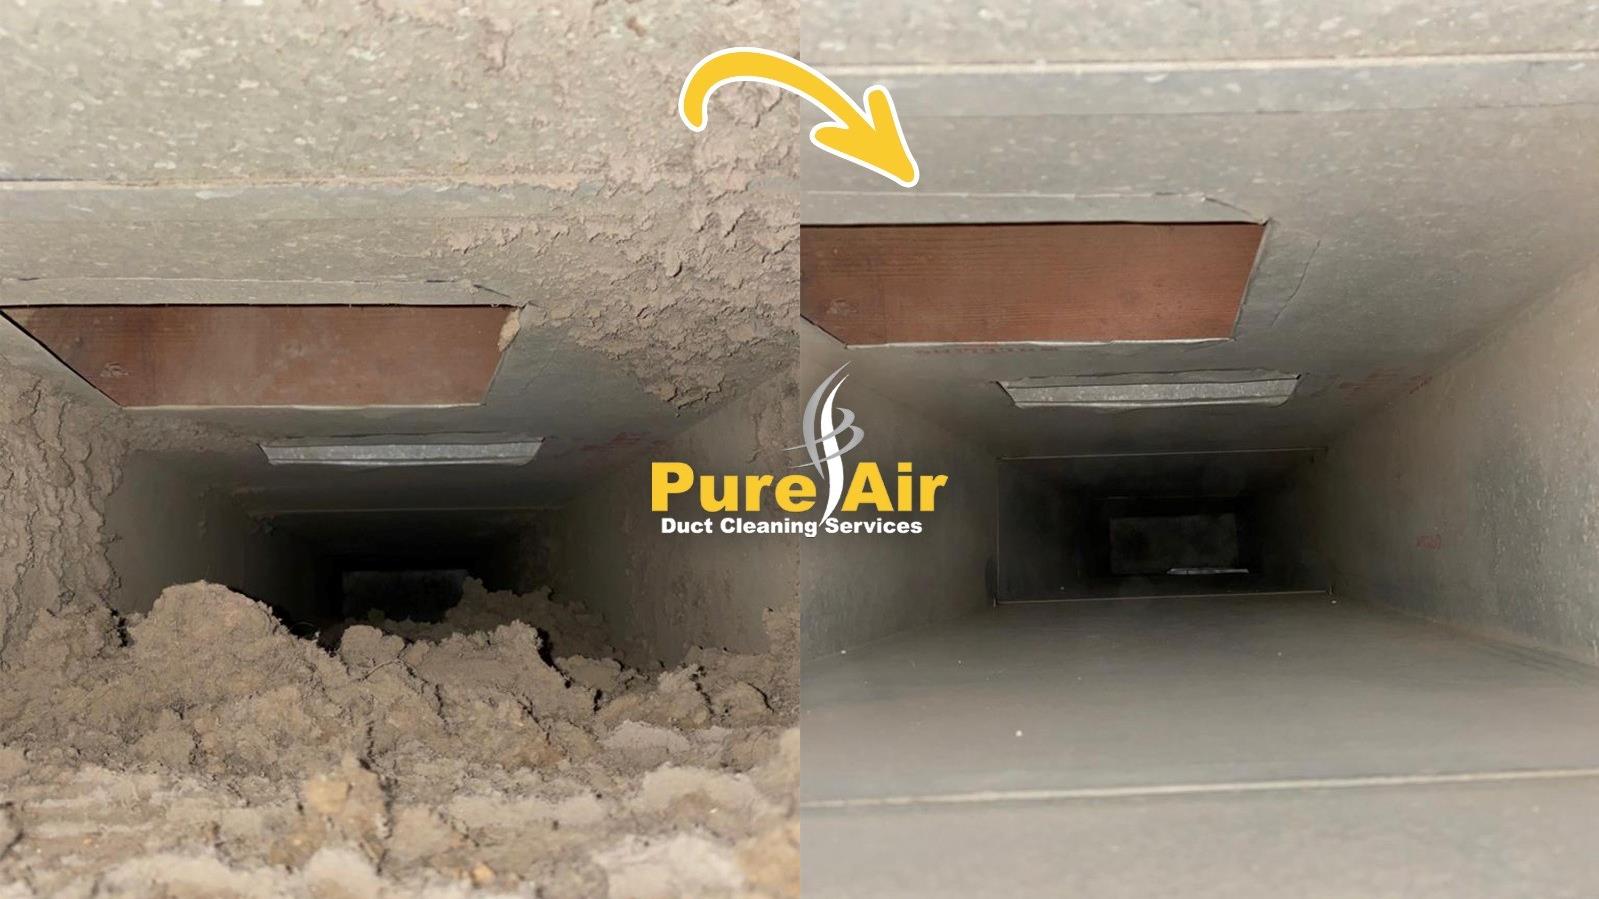 Pure Air Duct Cleaning MD/Air Duct Cleaning                                                                                                                                                                                       